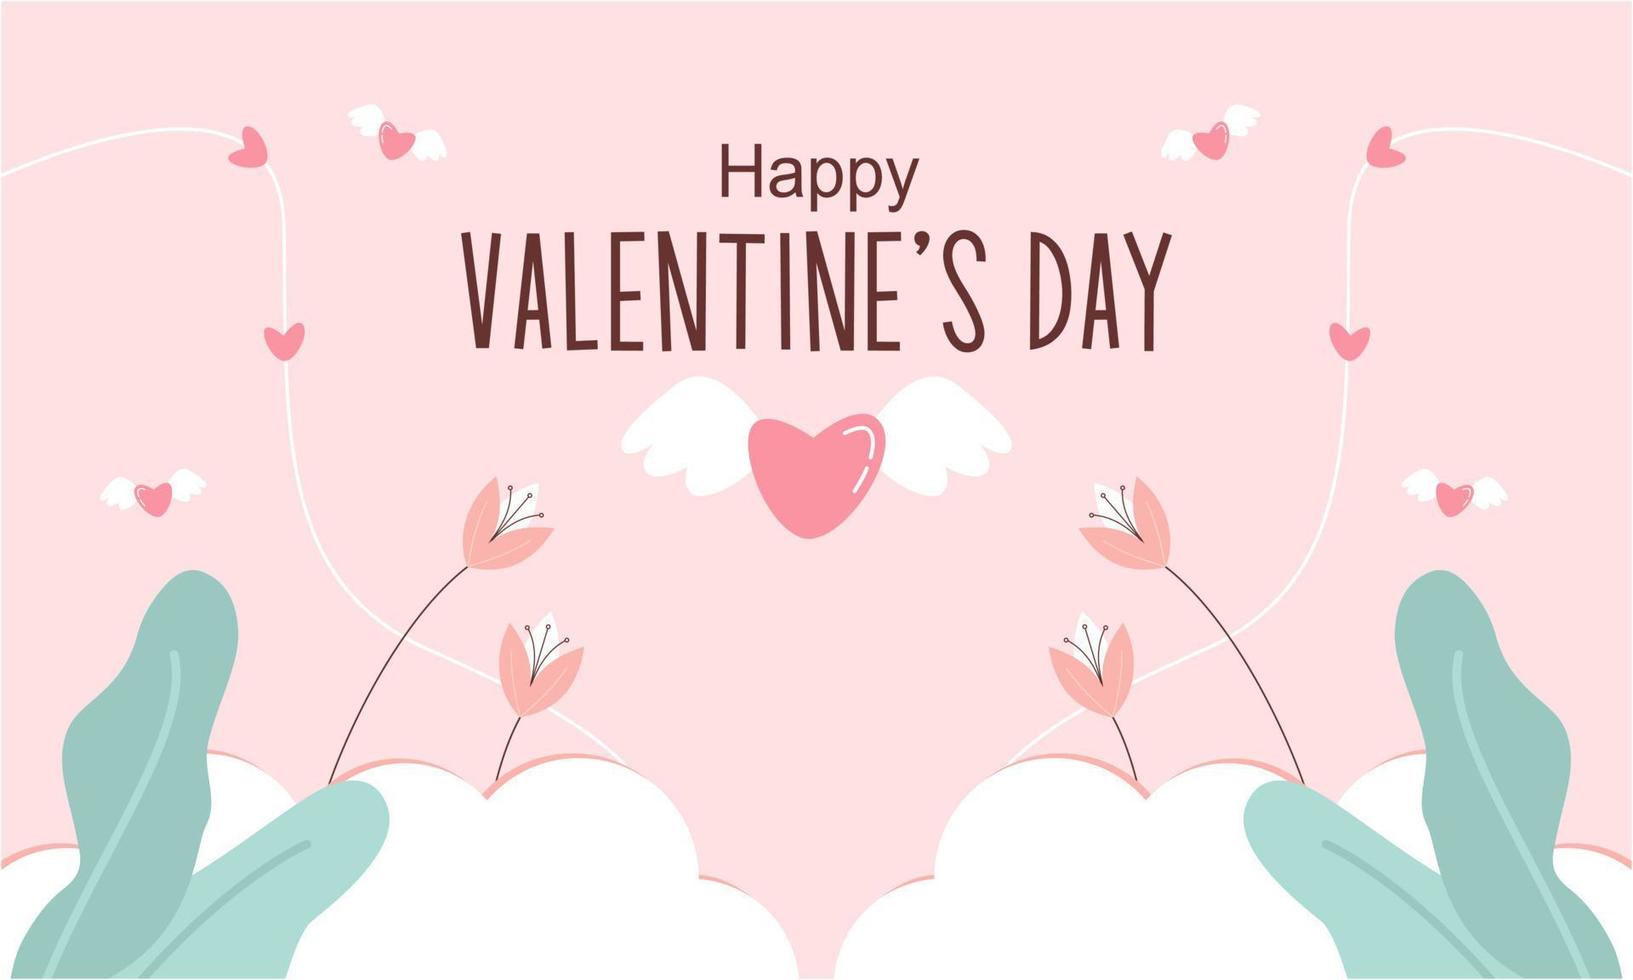 Valentines day background with heart shaped balloons illustration vector